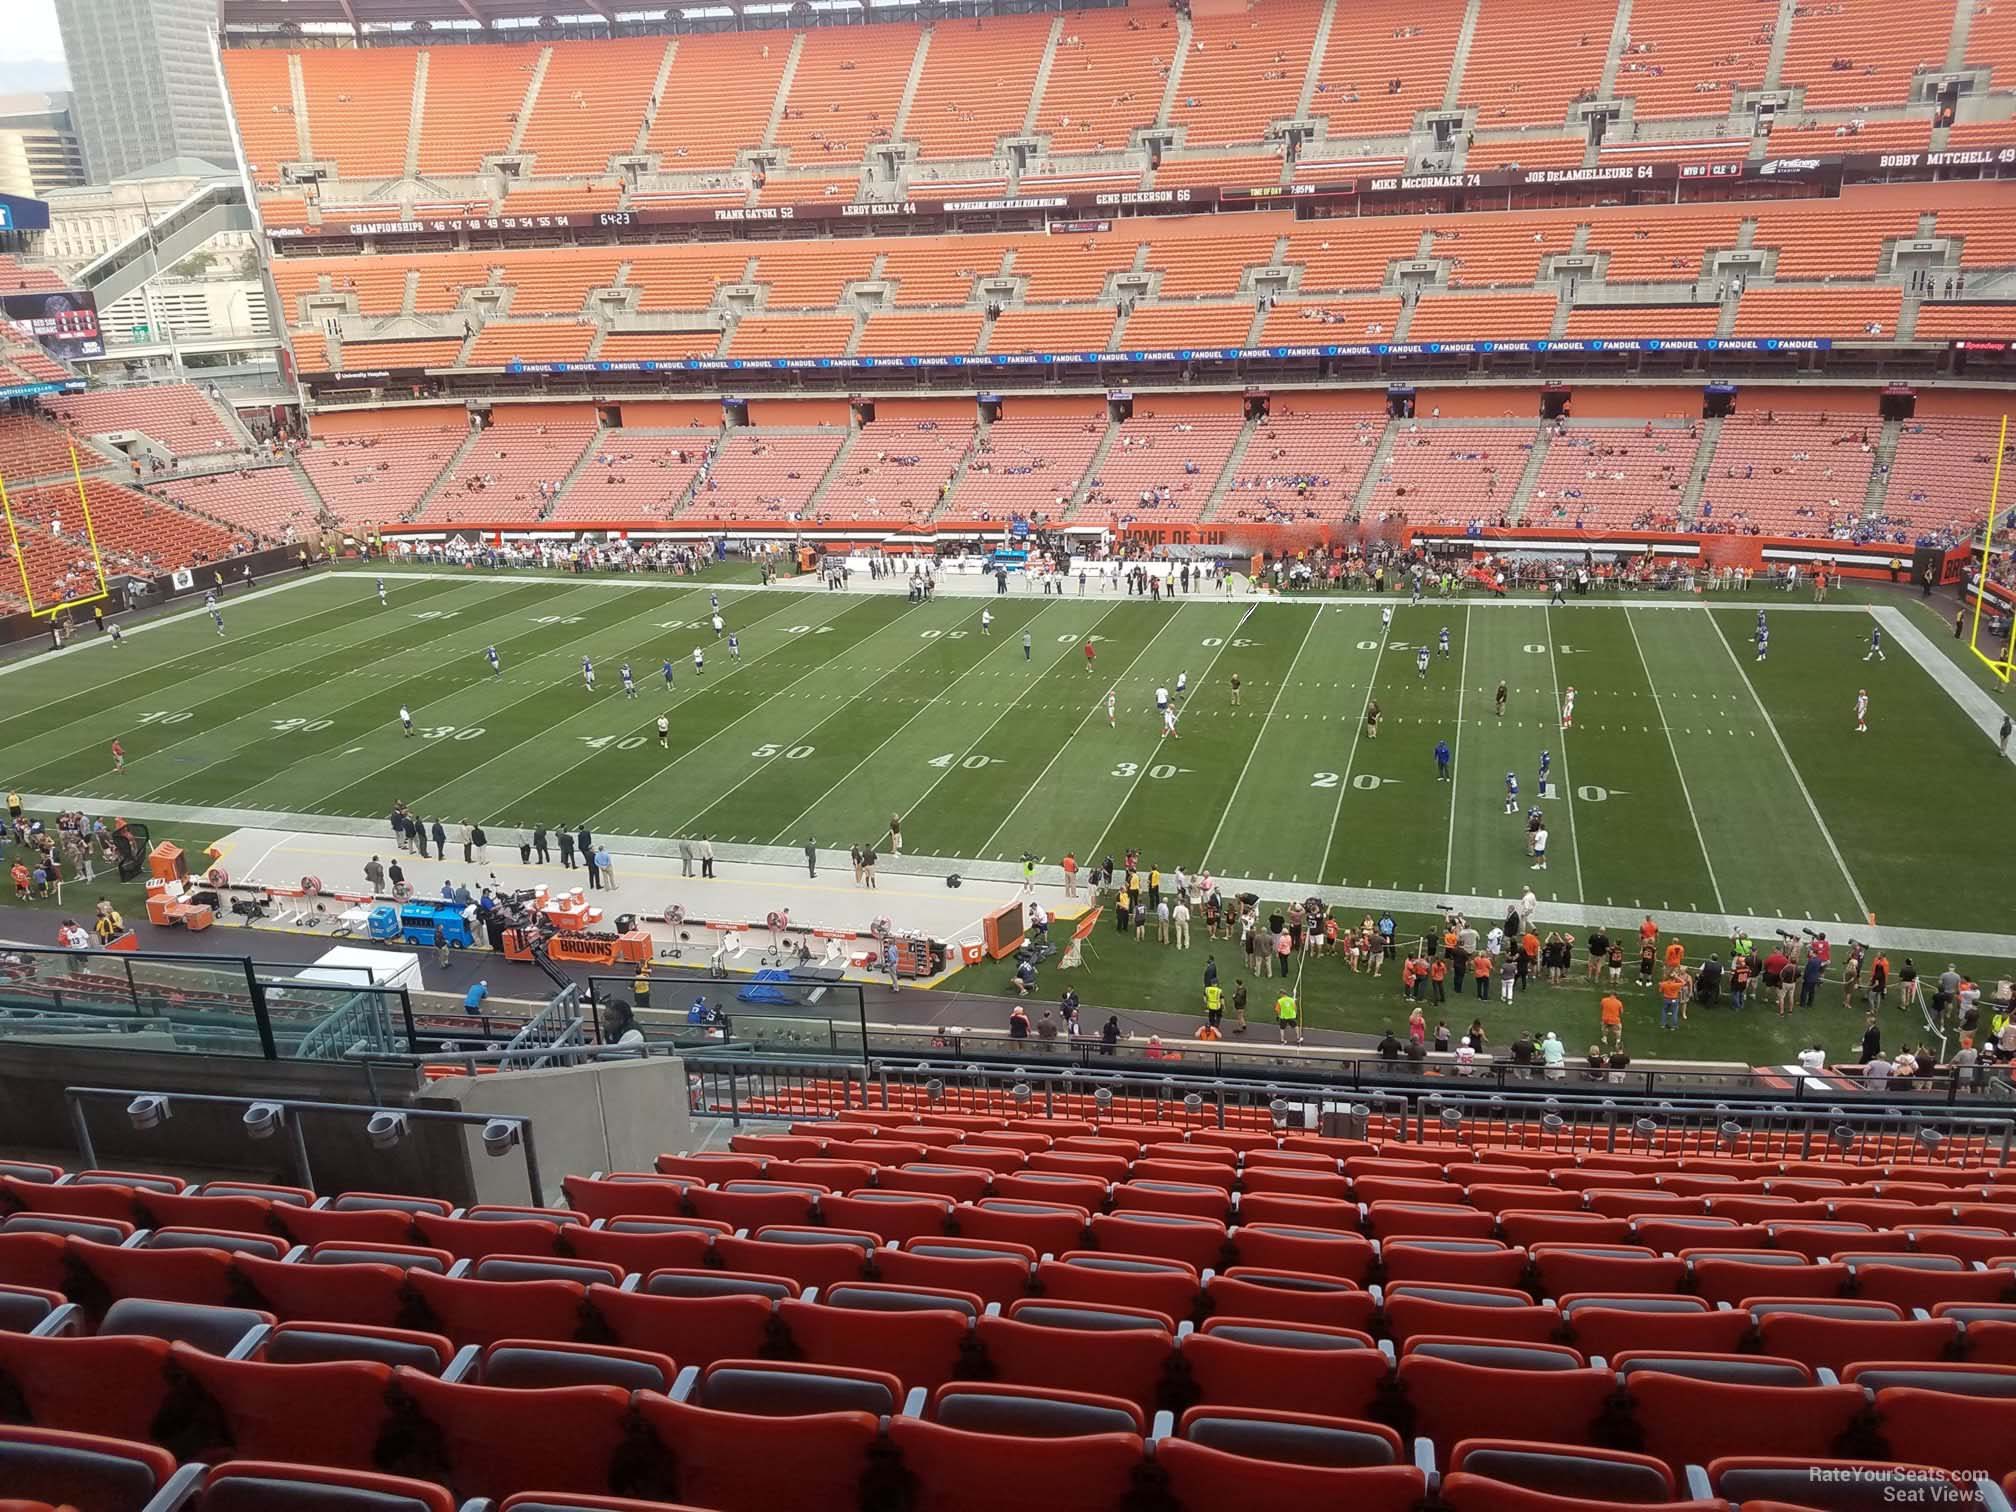 section 336, row 18 seat view  - cleveland browns stadium